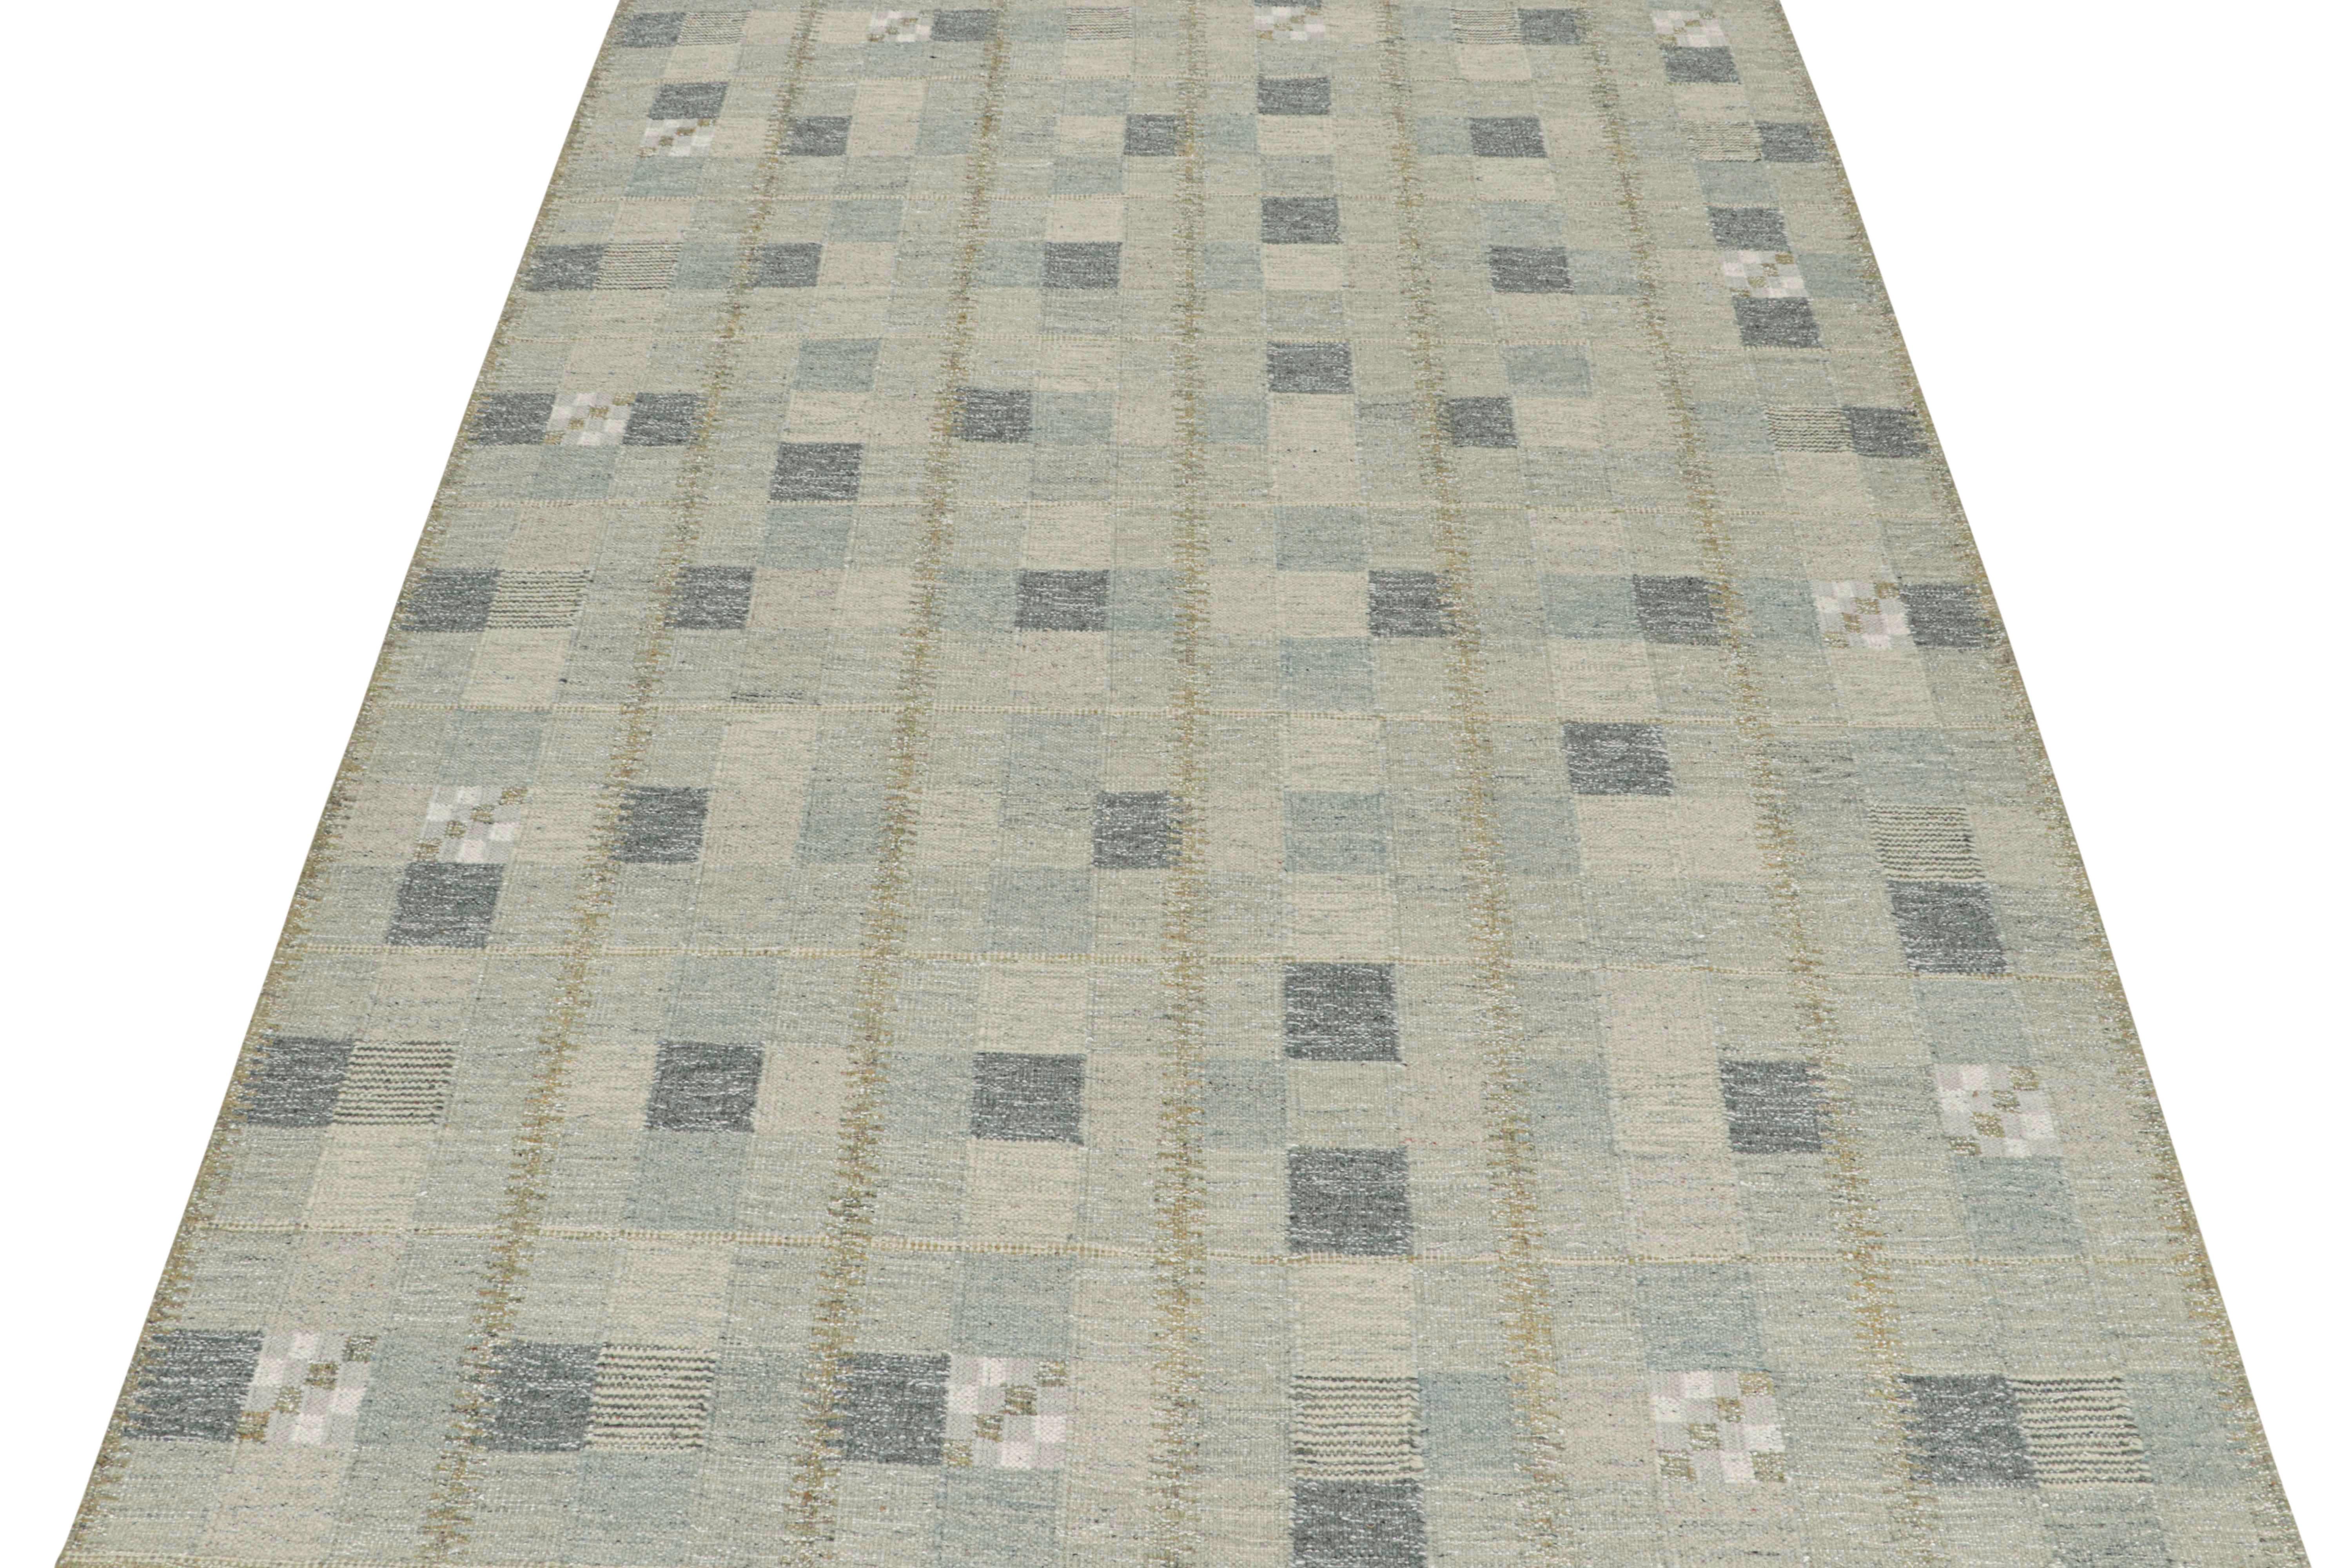 This 10x14 flat weave is a new addition to the Scandinavian Kilim collection by Rug & Kilim. Handwoven in wool and natural yarns, its design reflects a contemporary take on mid-century Rollakans and Swedish Deco style.

On the Design:

This new